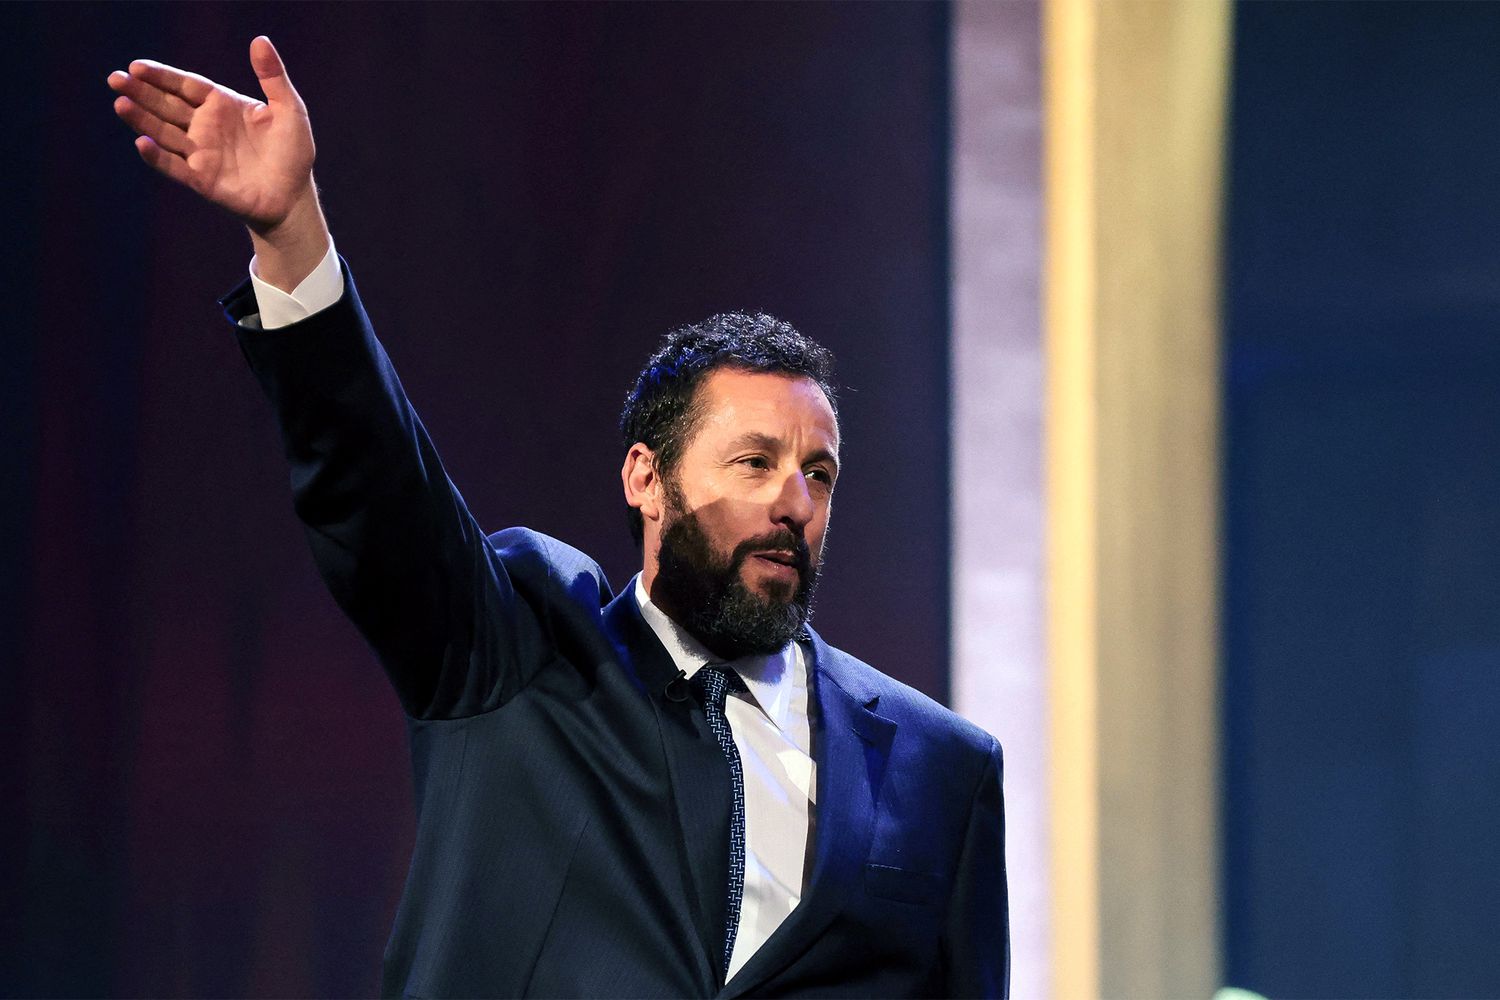 US actor Adam Sandler waves as he steps on stage during the 24th Annual Mark Twain Prize For American Humor at the John F. Kennedy Center for the Performing Arts in Washington, DC, on March 19, 2023. - This year's award is honoring US actor and comedian Adam Sandler. (Photo by Oliver Contreras / AFP) (Photo by OLIVER CONTRERAS/AFP via Getty Images)